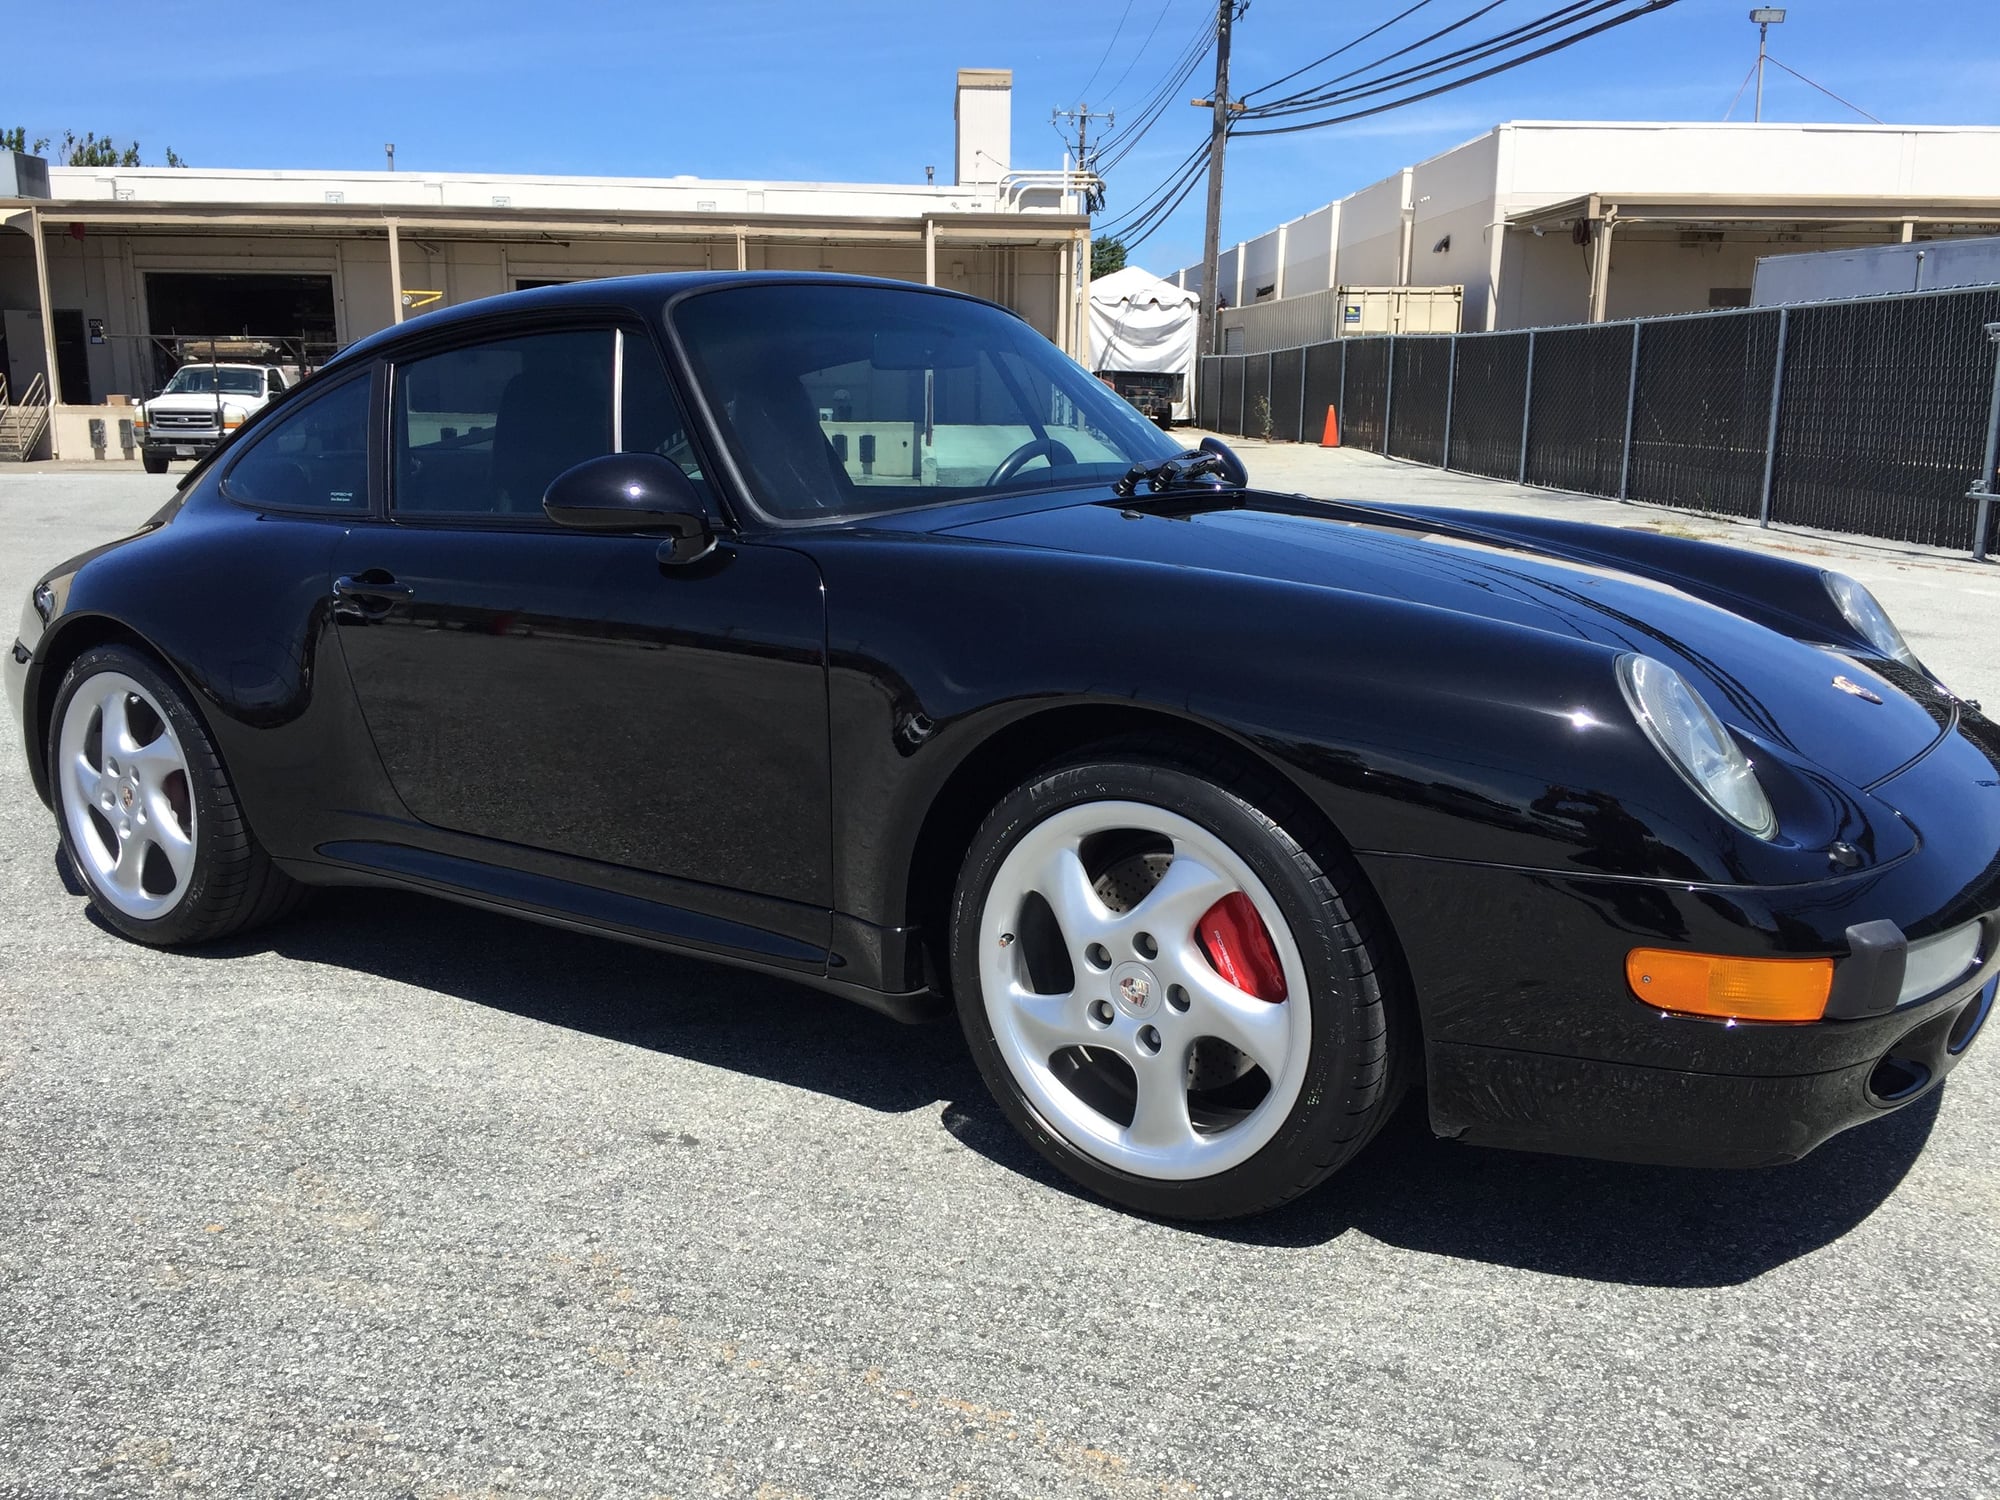 1996 Porsche 911 - 1996 C4S Black on Black - 34.7k miles - Used - VIN WP0AA2997TS323484 - 34,750 Miles - 6 cyl - AWD - Manual - Coupe - Black - San Francisco, CA 94123, United States